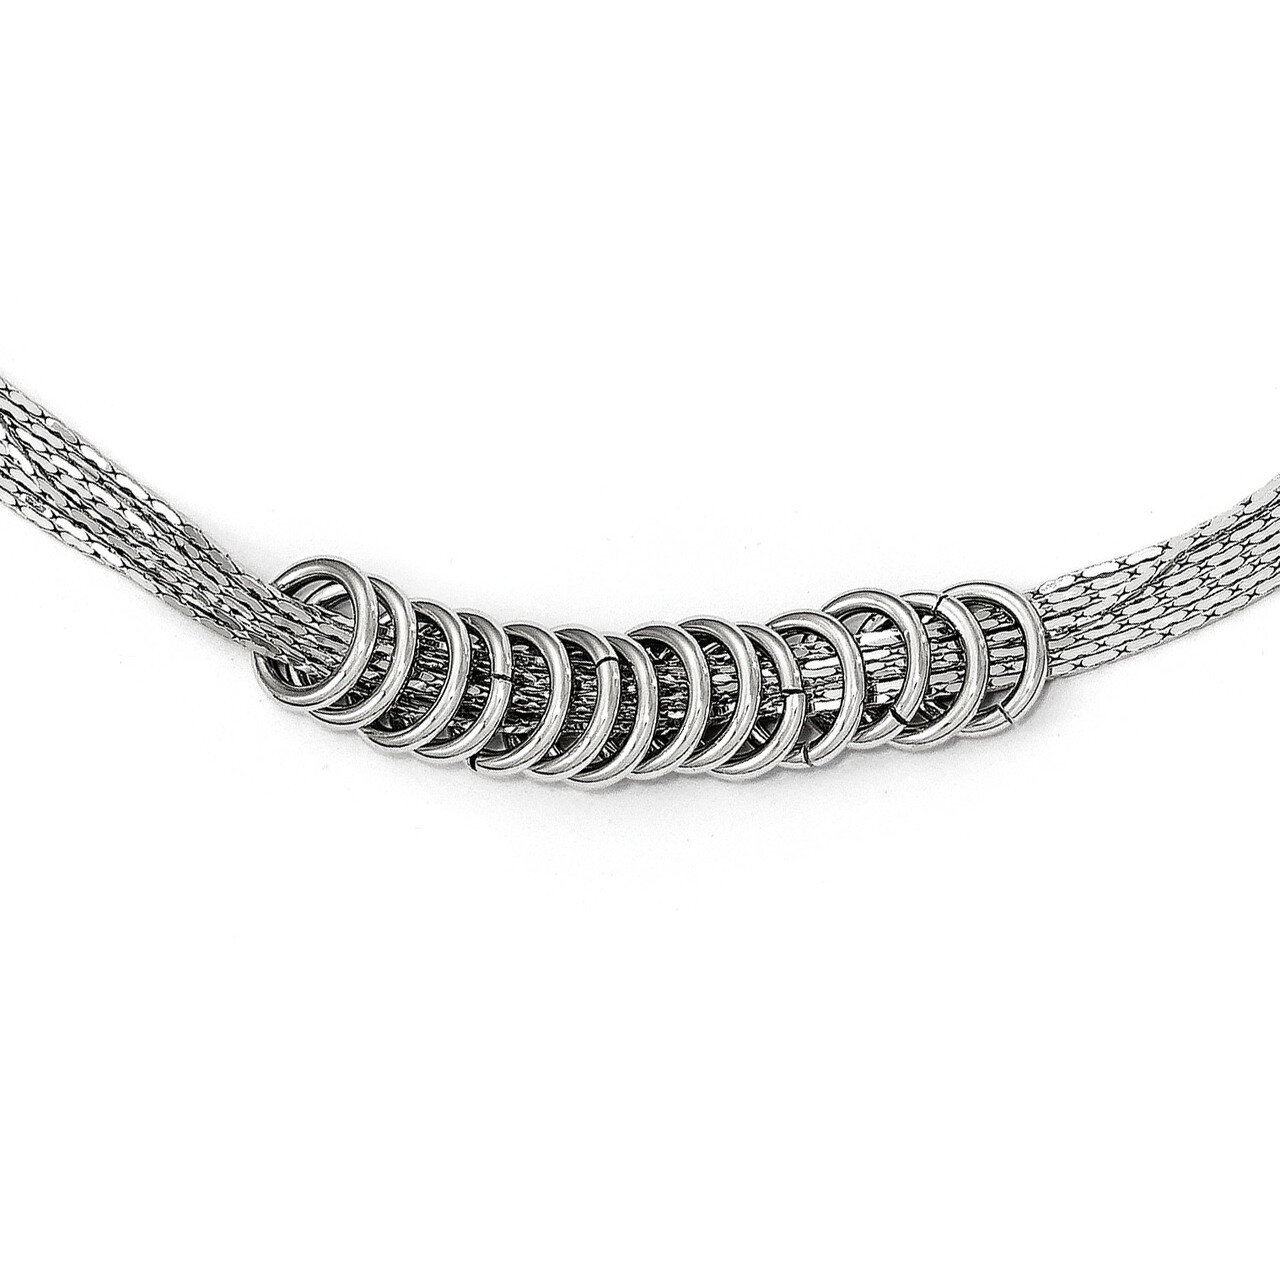 9 -.50 MM Multi-Strand Necklace 18 Inch Sterling Silver HB-QLF547-18